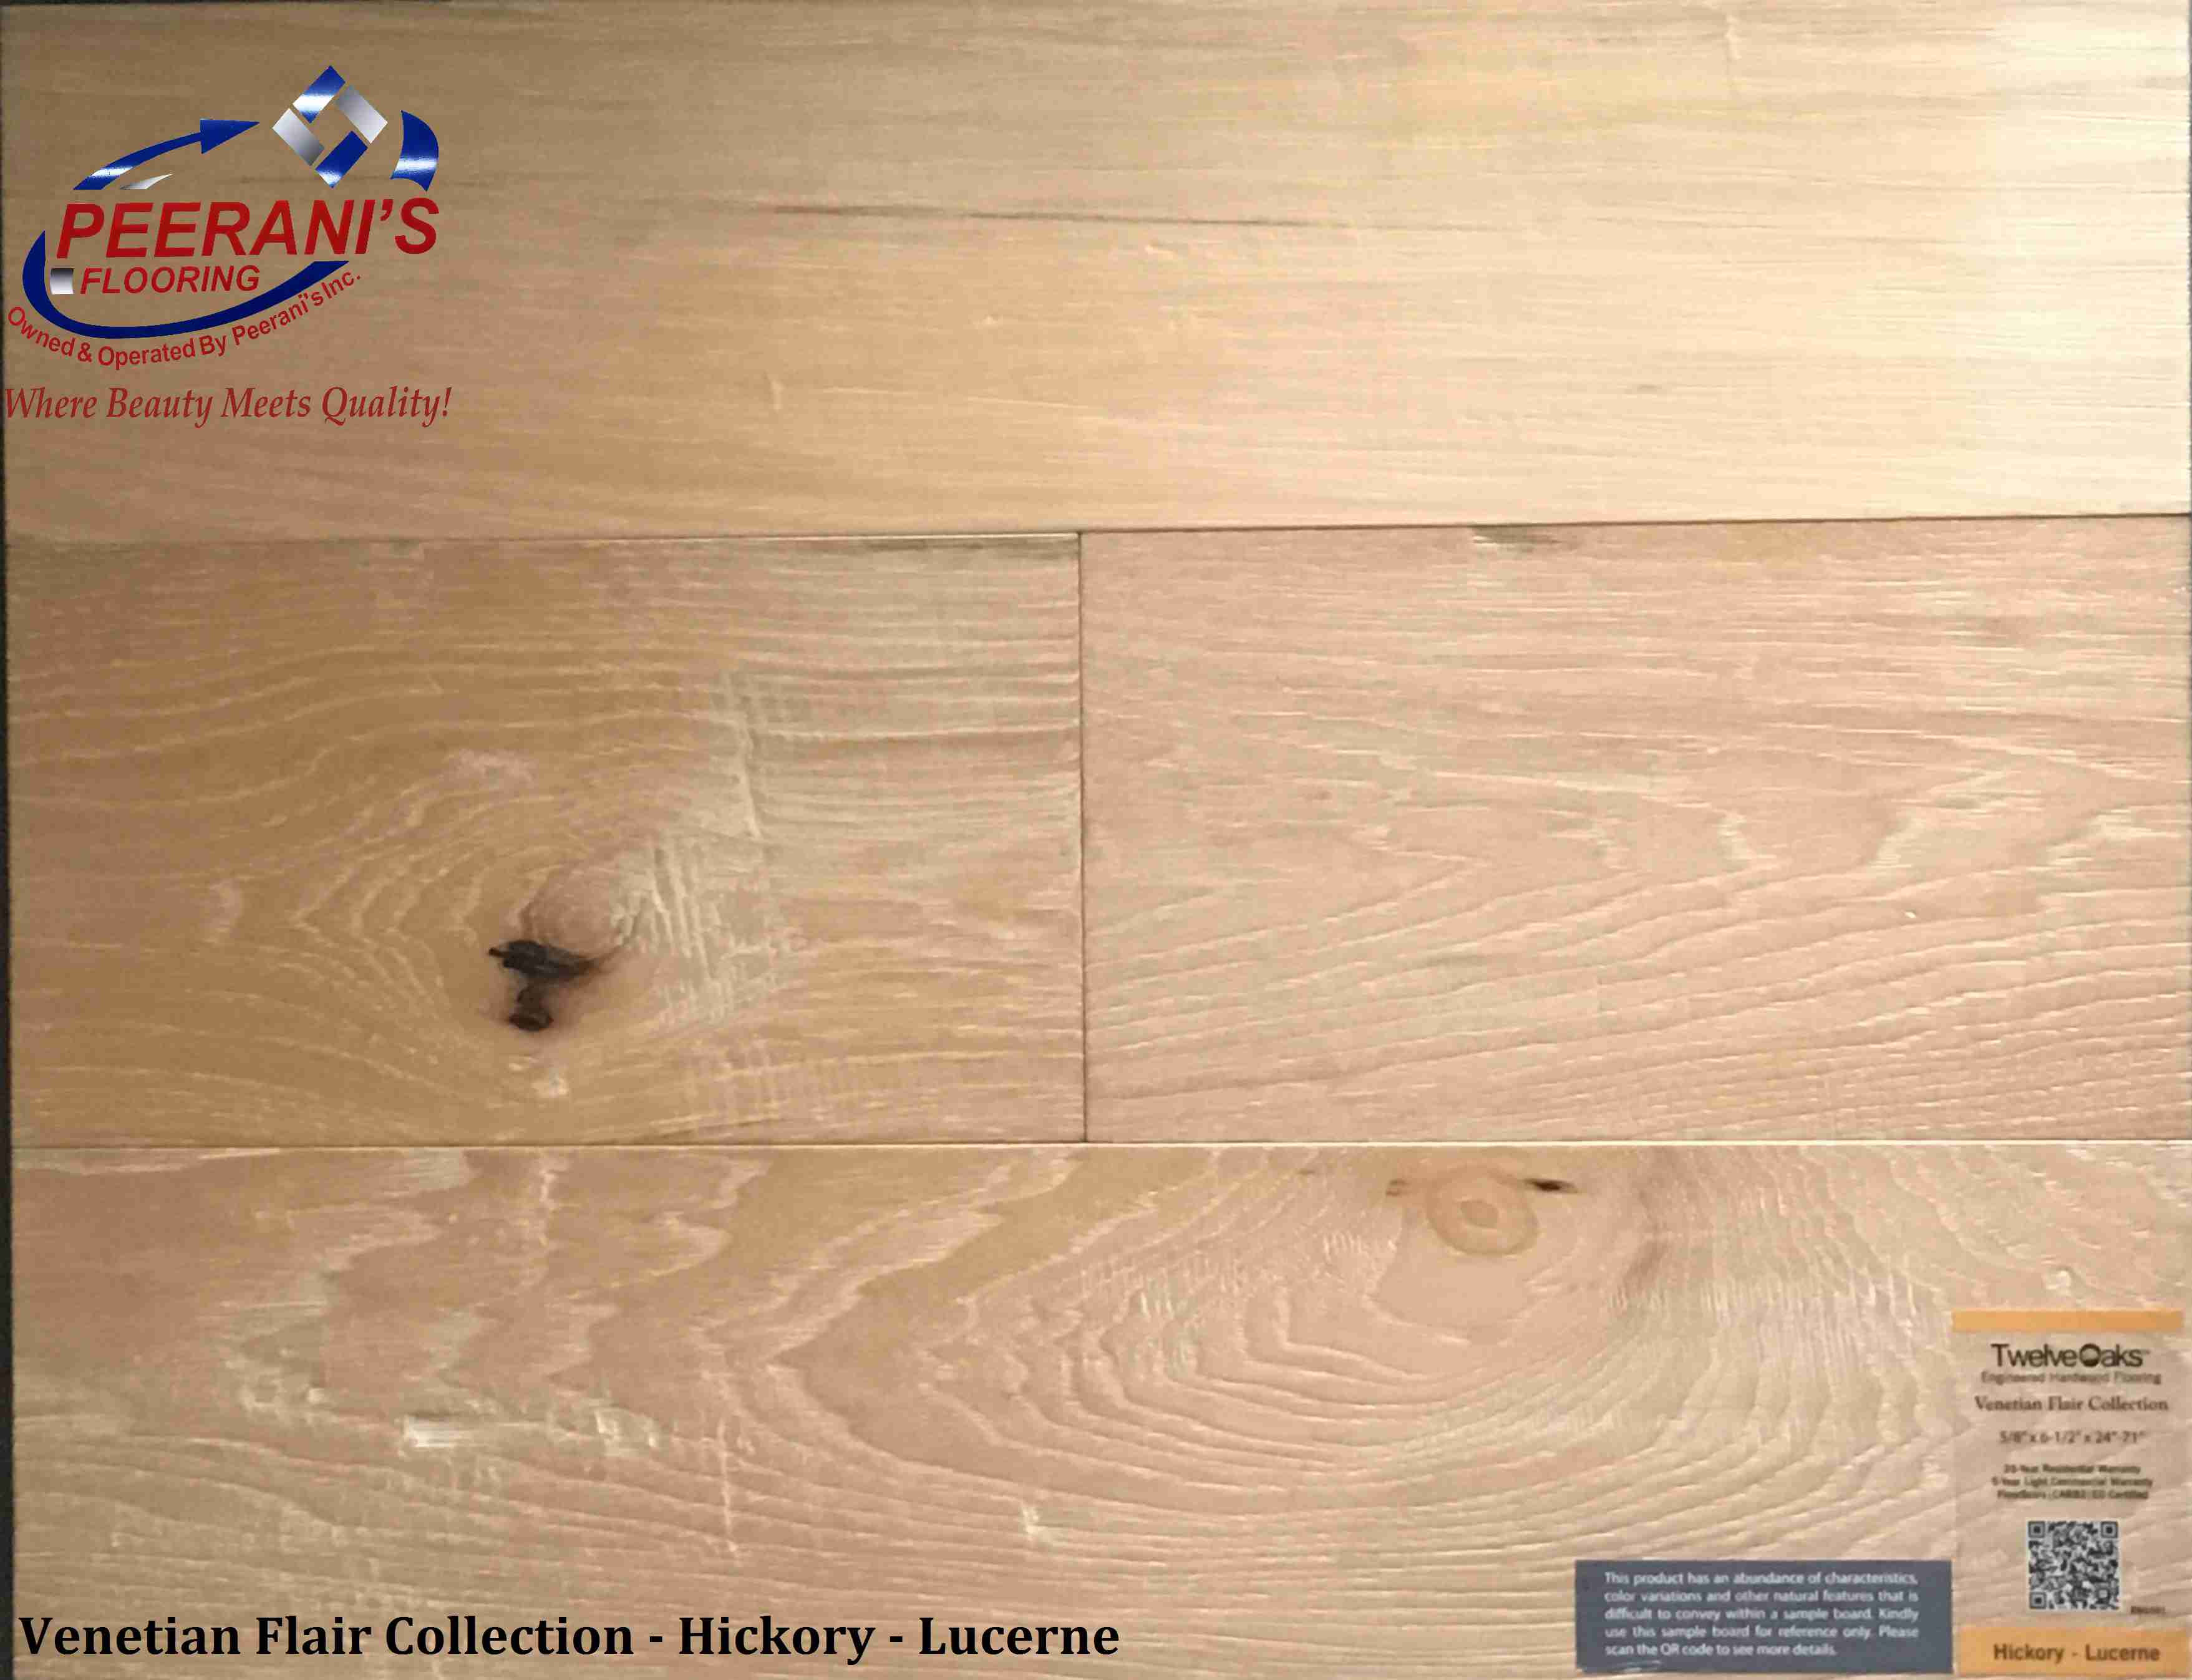 23 Ideal Hardwood Floor Refinishing Windsor 2024 free download hardwood floor refinishing windsor of twelve oaks archives page 3 of 4 peeranis for venetian flair hickory lucerne